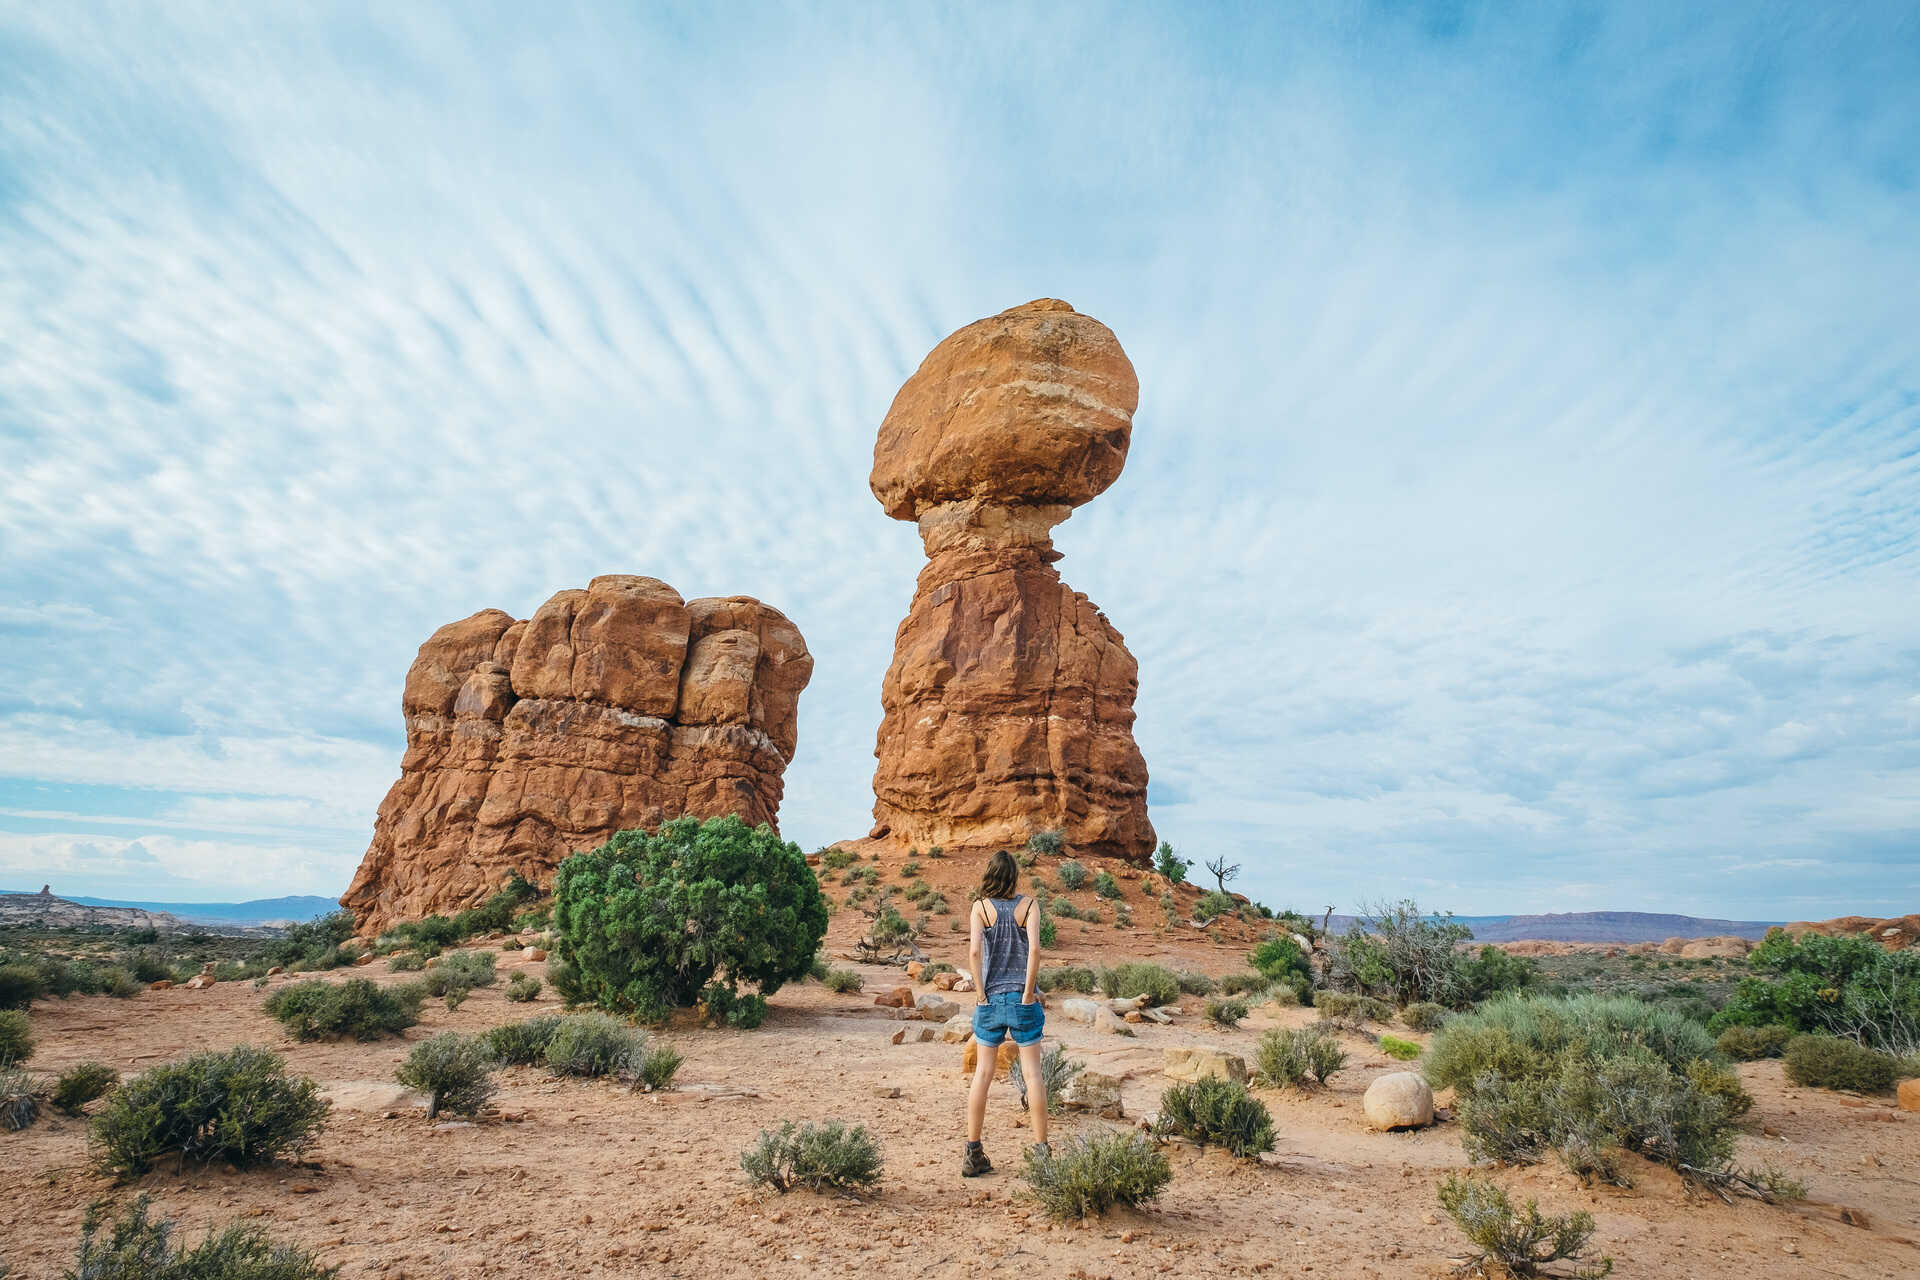 Nicole at Balance Rock, Arches National Park